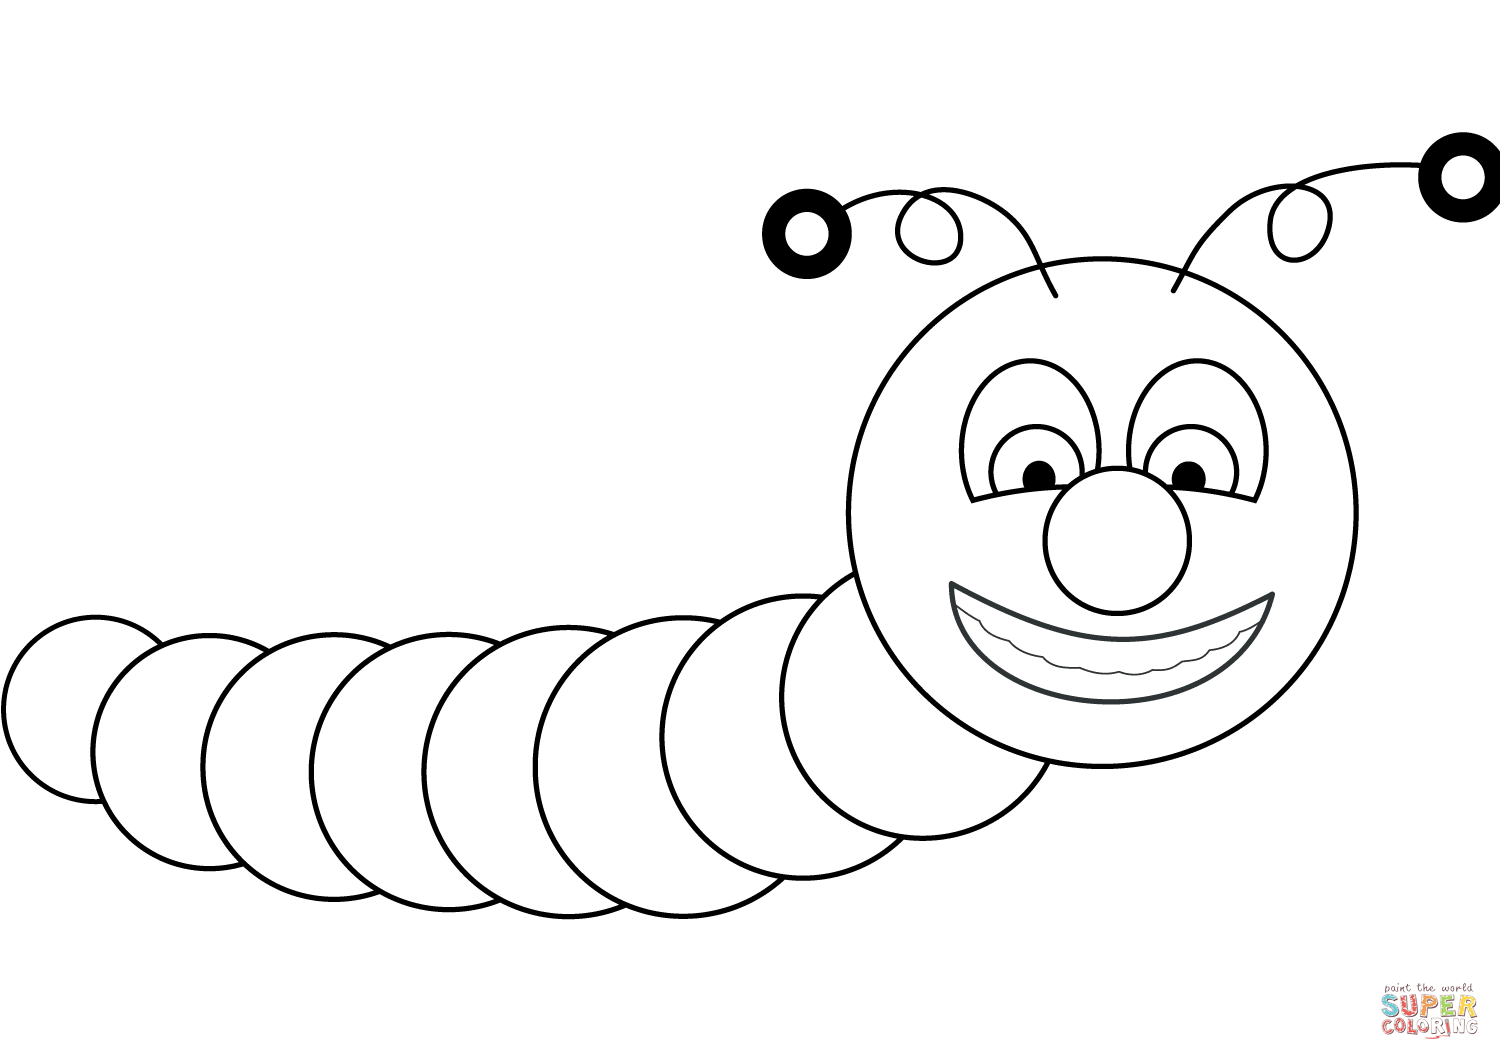 Cartoon worm coloring page free printable coloring pages